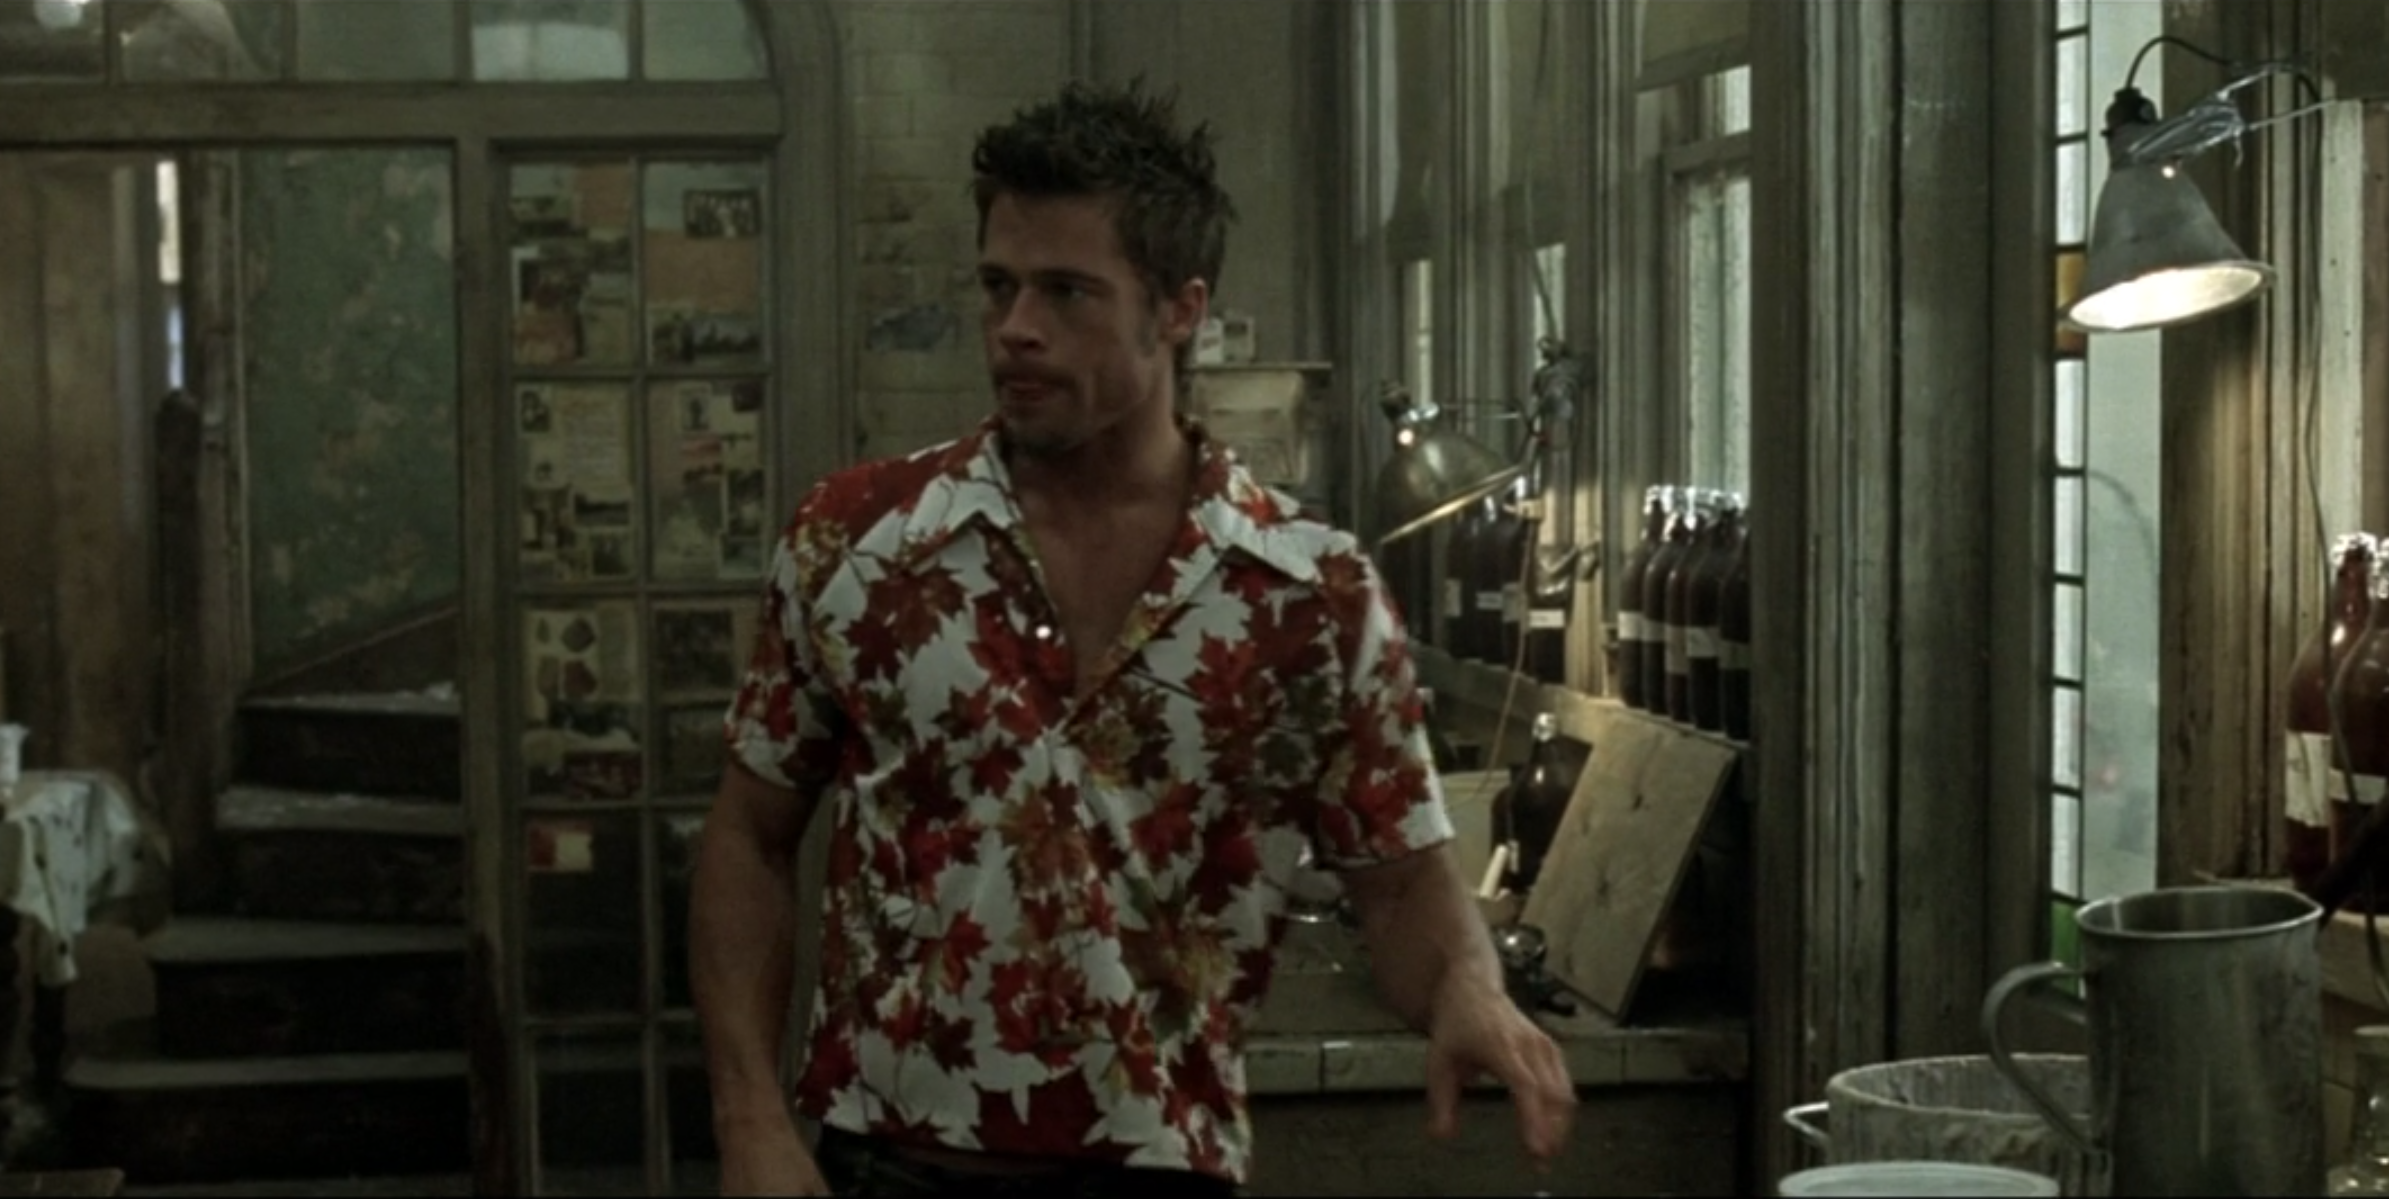 How The Flamboyant Fashion In Fight Club Defied The Status.